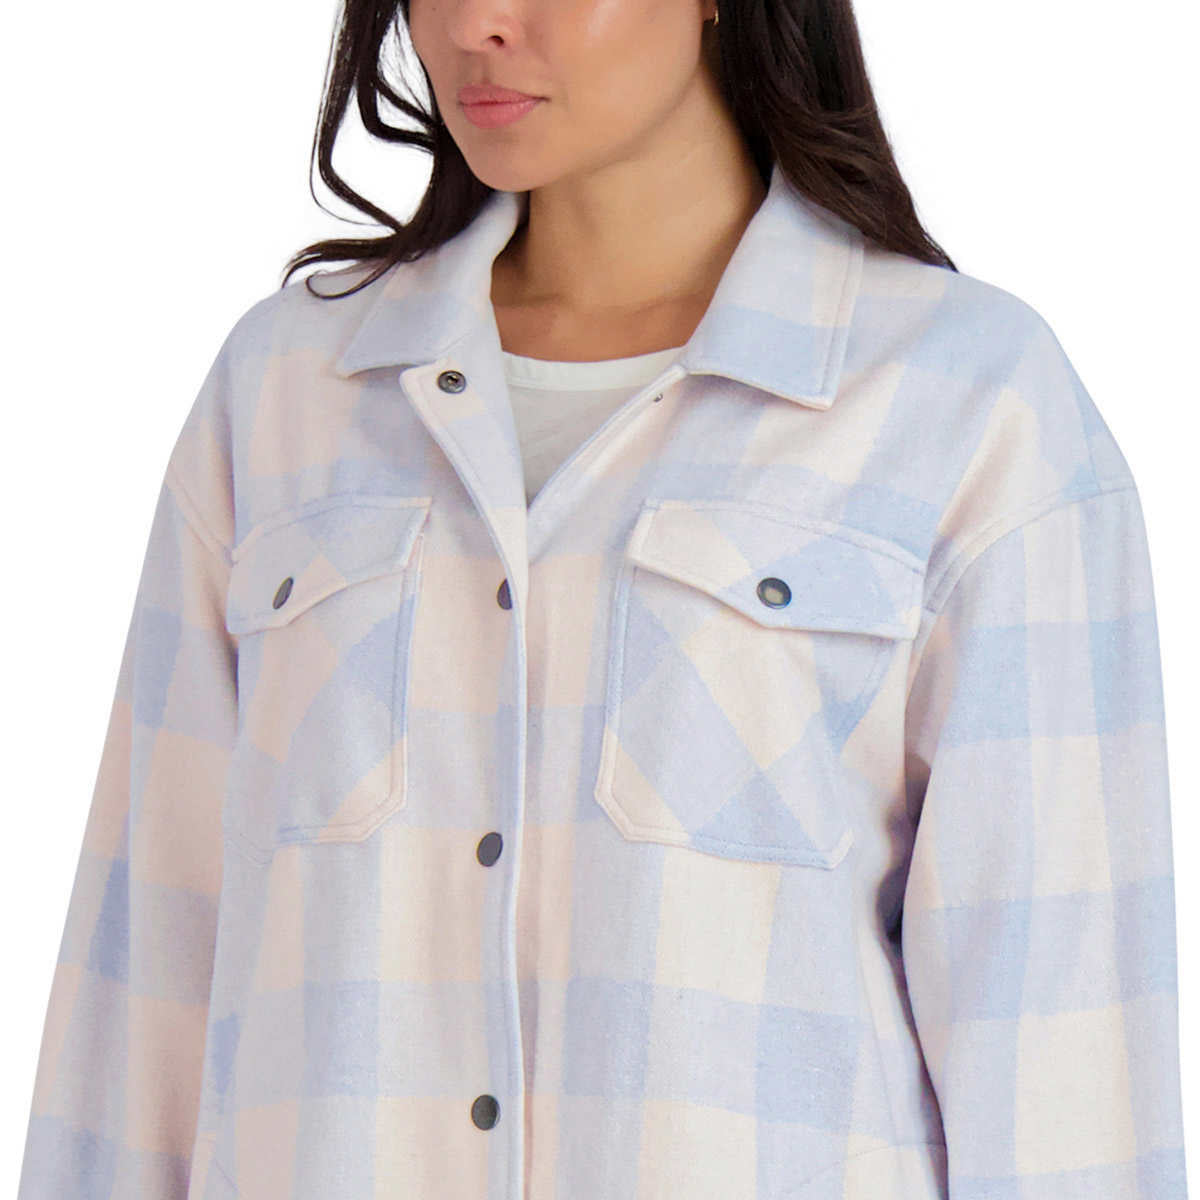 HFX Women's Relaxed Fit Front Snap Cozy Plaid Shirt Jacket